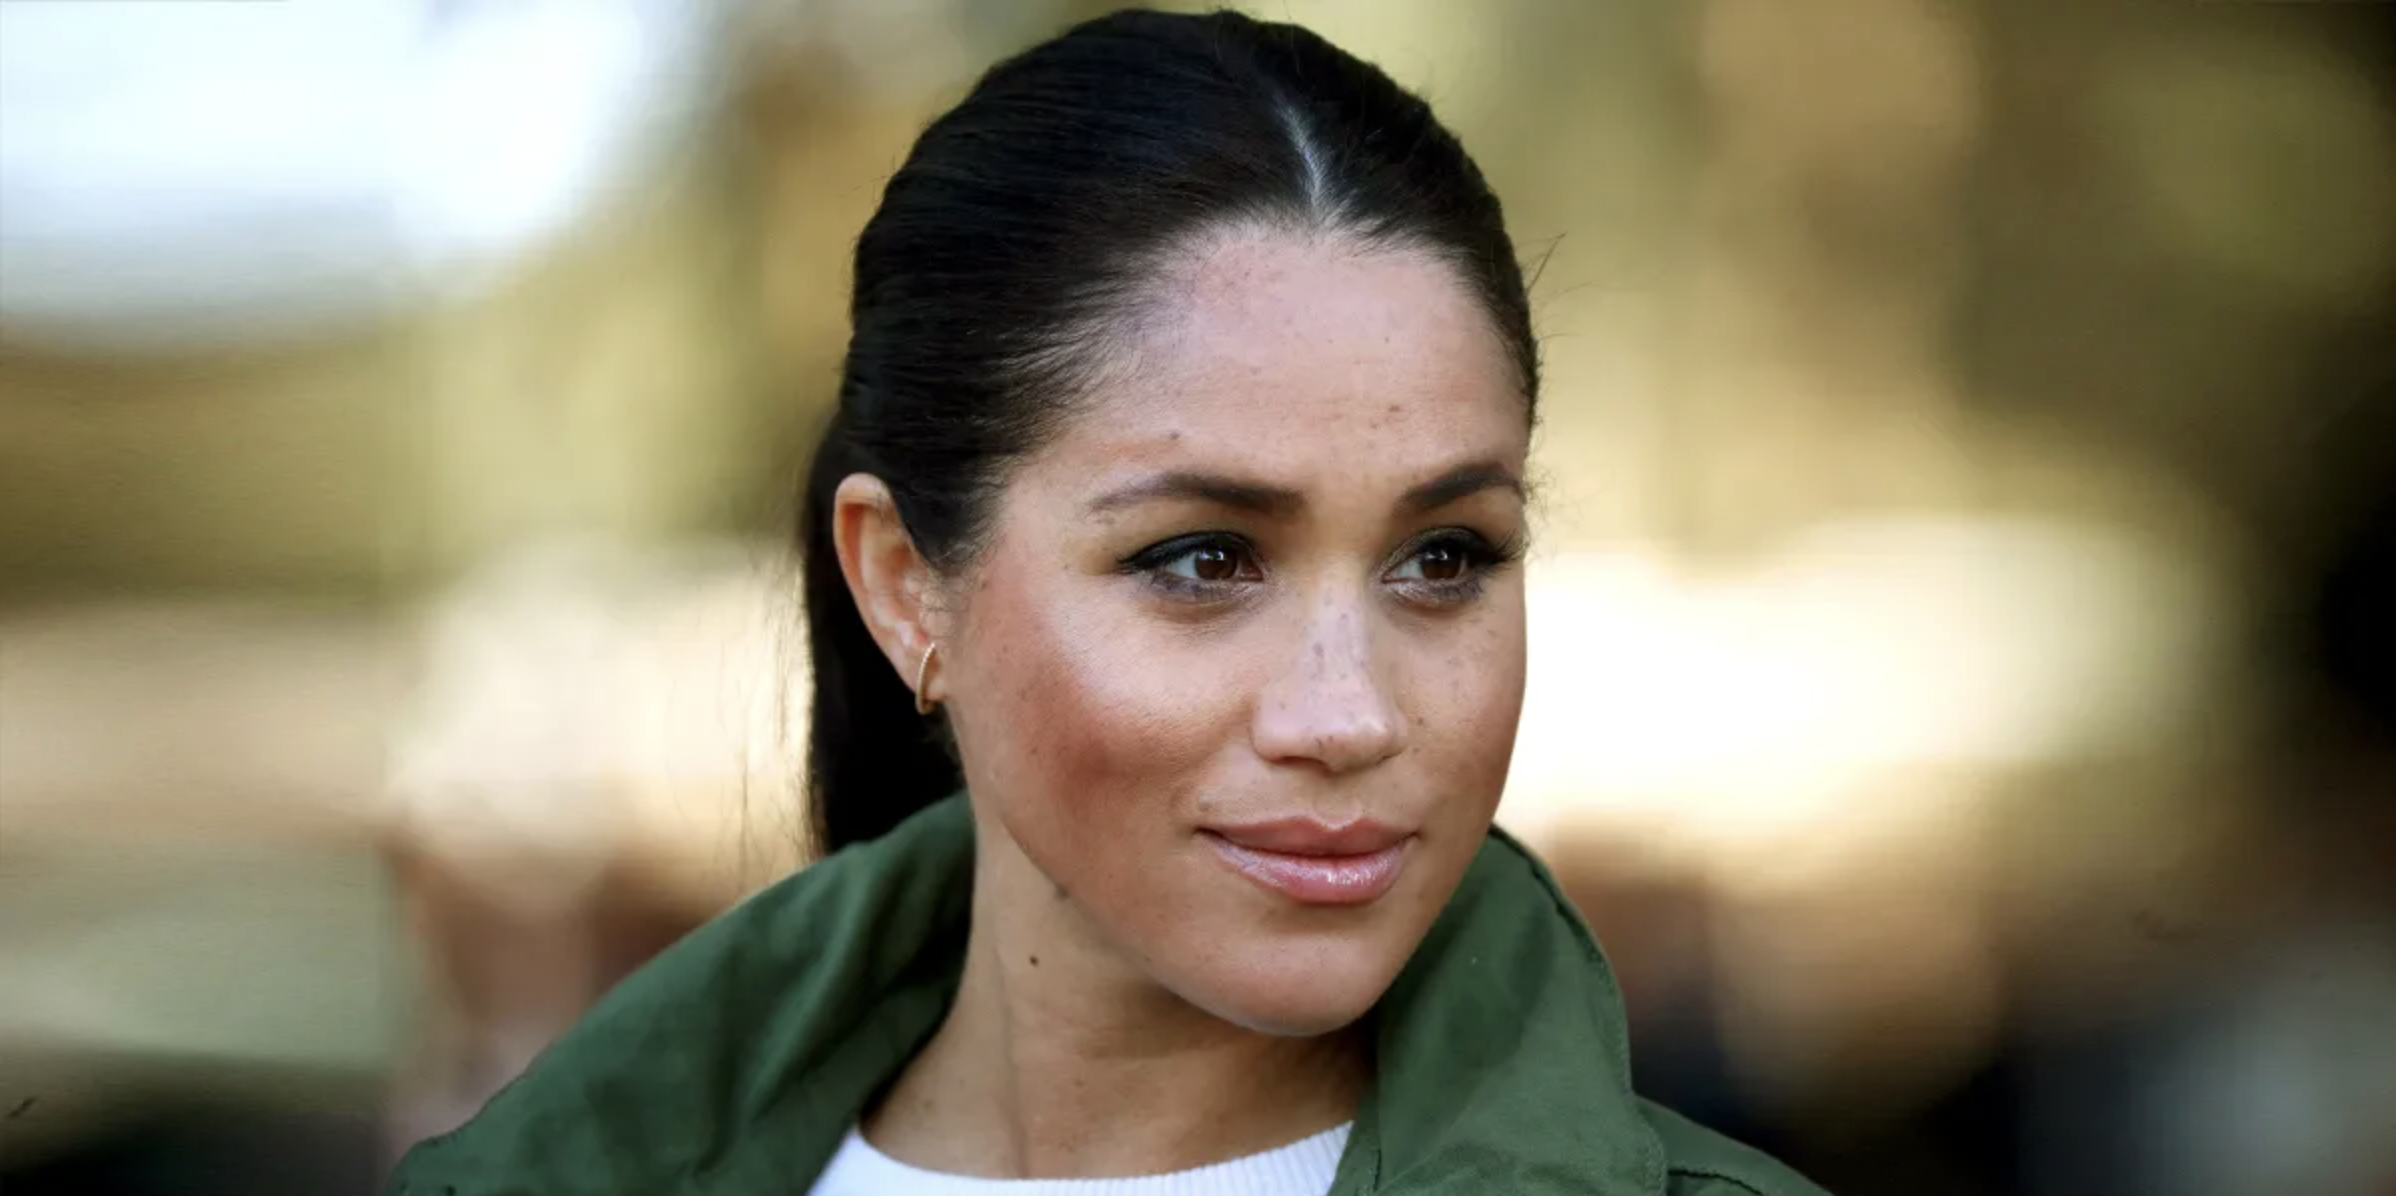 Meghan Markle | Source: Getty Images